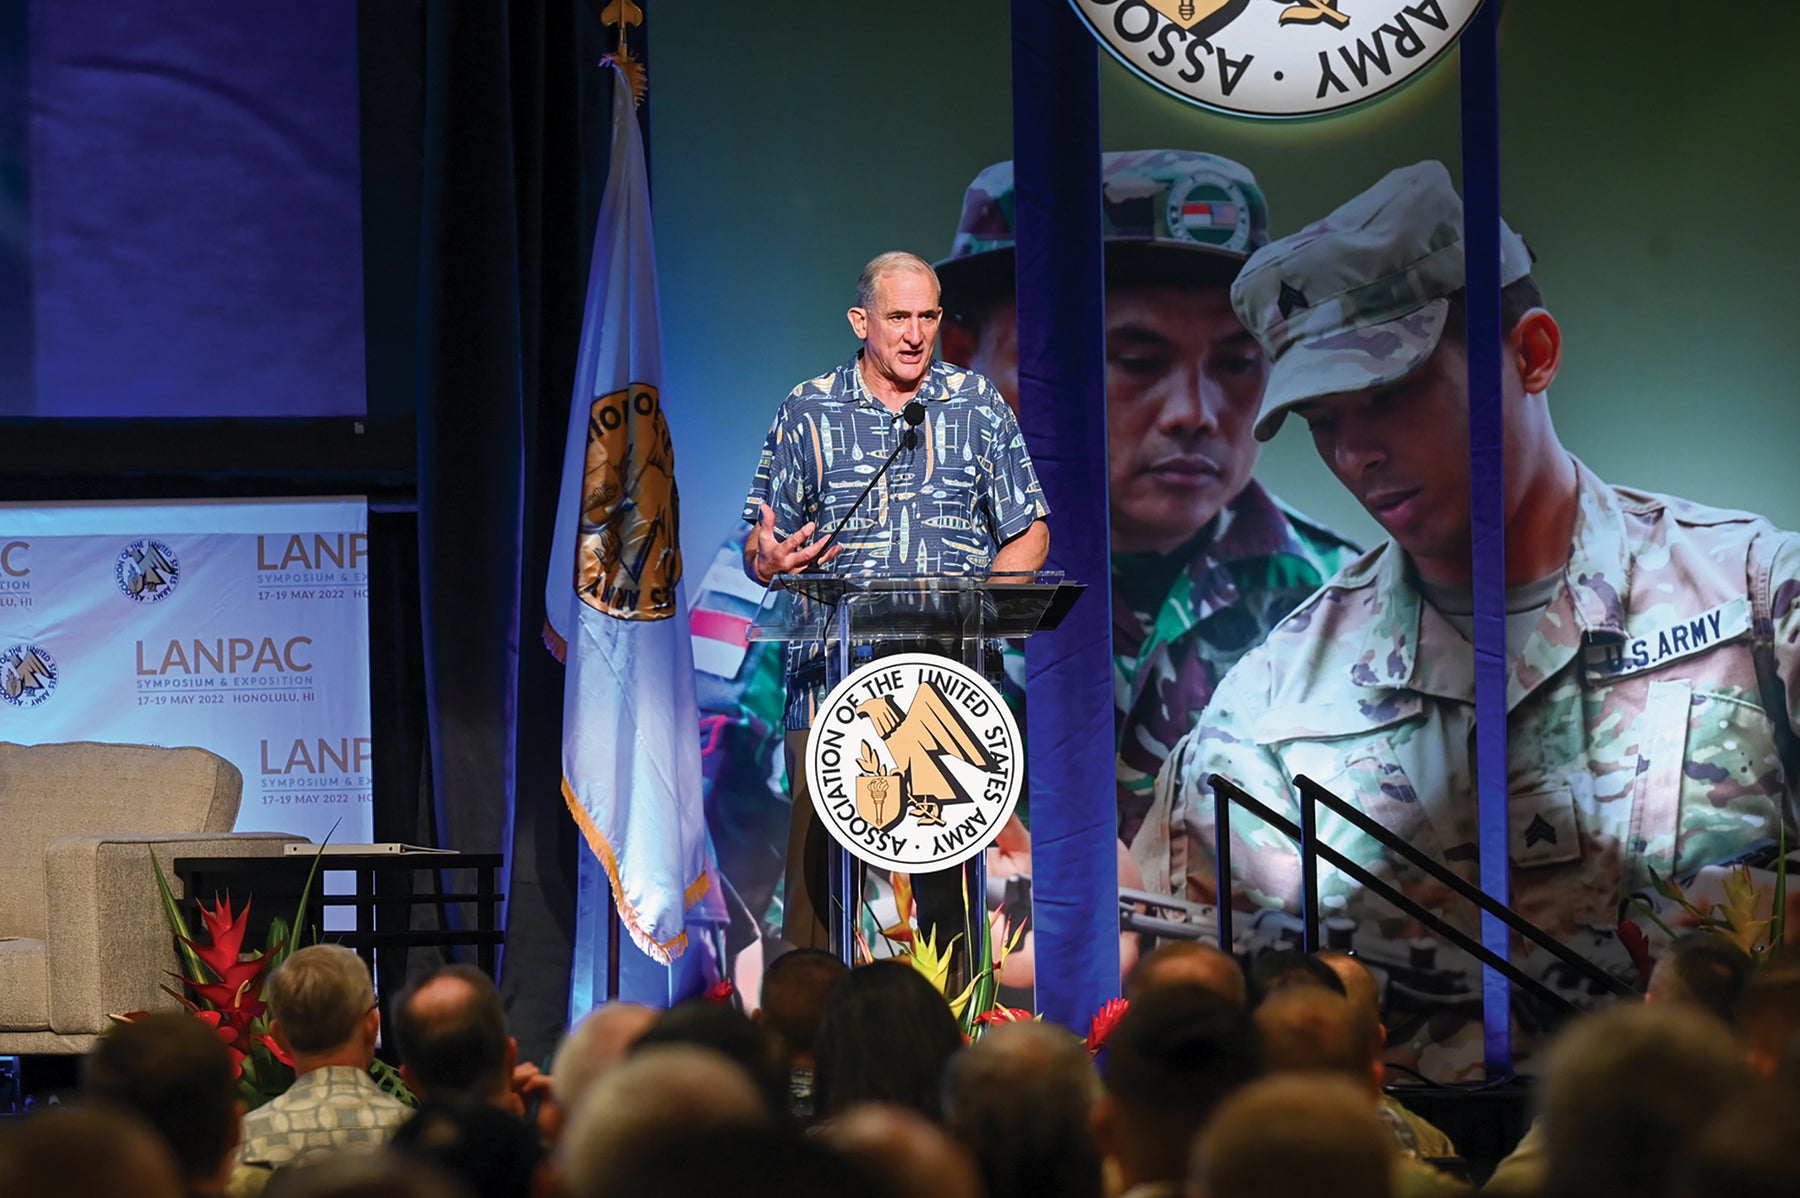 Association of the U.S. Army President and CEO retired Gen. Bob Brown addresses the audience at AUSA’s 2022 LANPAC Symposium and Exposition in Honolulu. (Credit: AUSA)